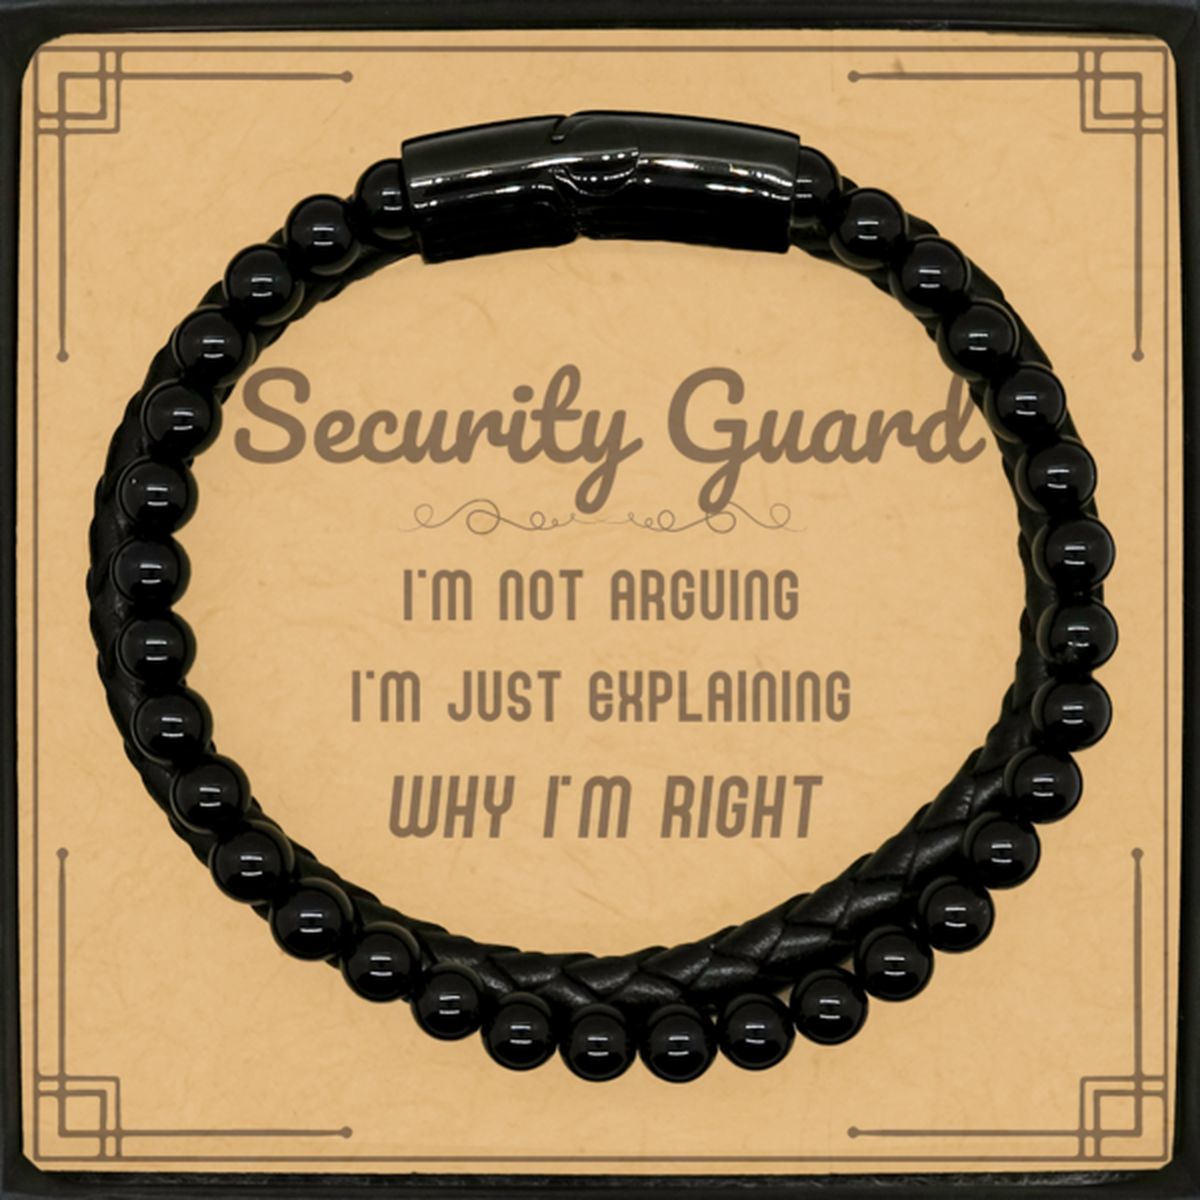 Security Guard I'm not Arguing. I'm Just Explaining Why I'm RIGHT Stone Leather Bracelets, Funny Saying Quote Security Guard Gifts For Security Guard Message Card Graduation Birthday Christmas Gifts for Men Women Coworker